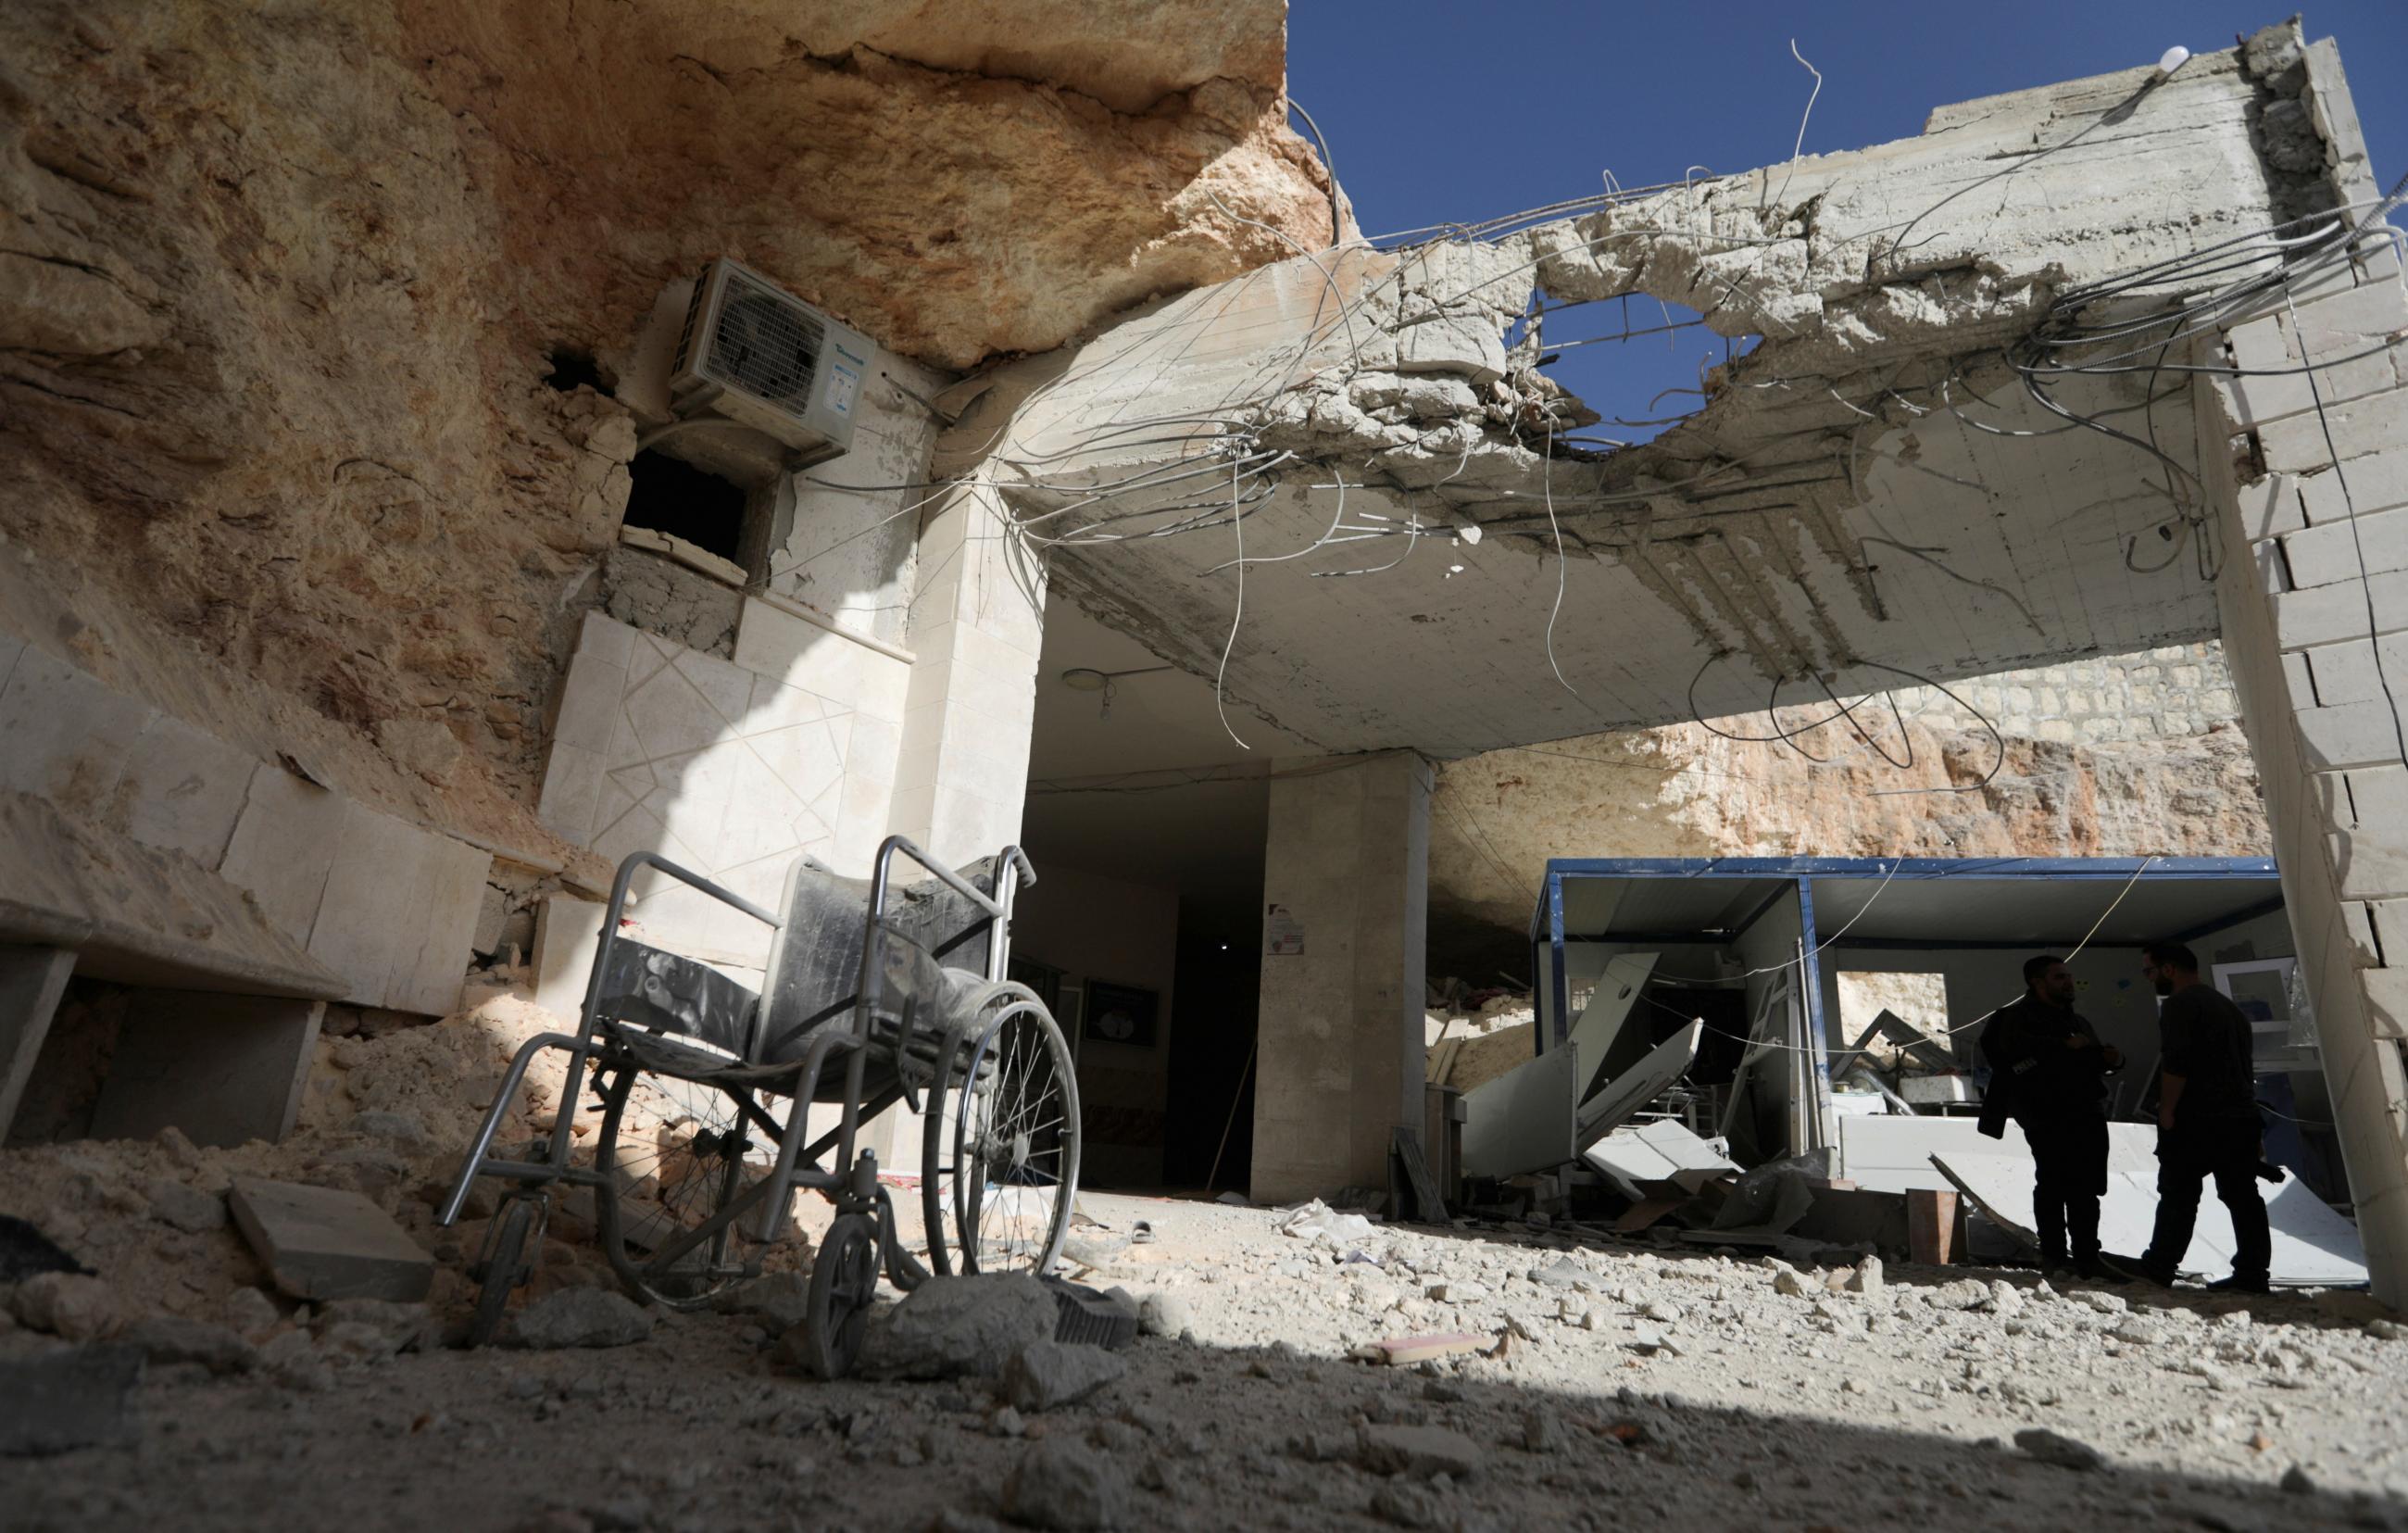 An empty wheel chair stands covered in dust in the remains of a bombed hospital in Atareb, Syria